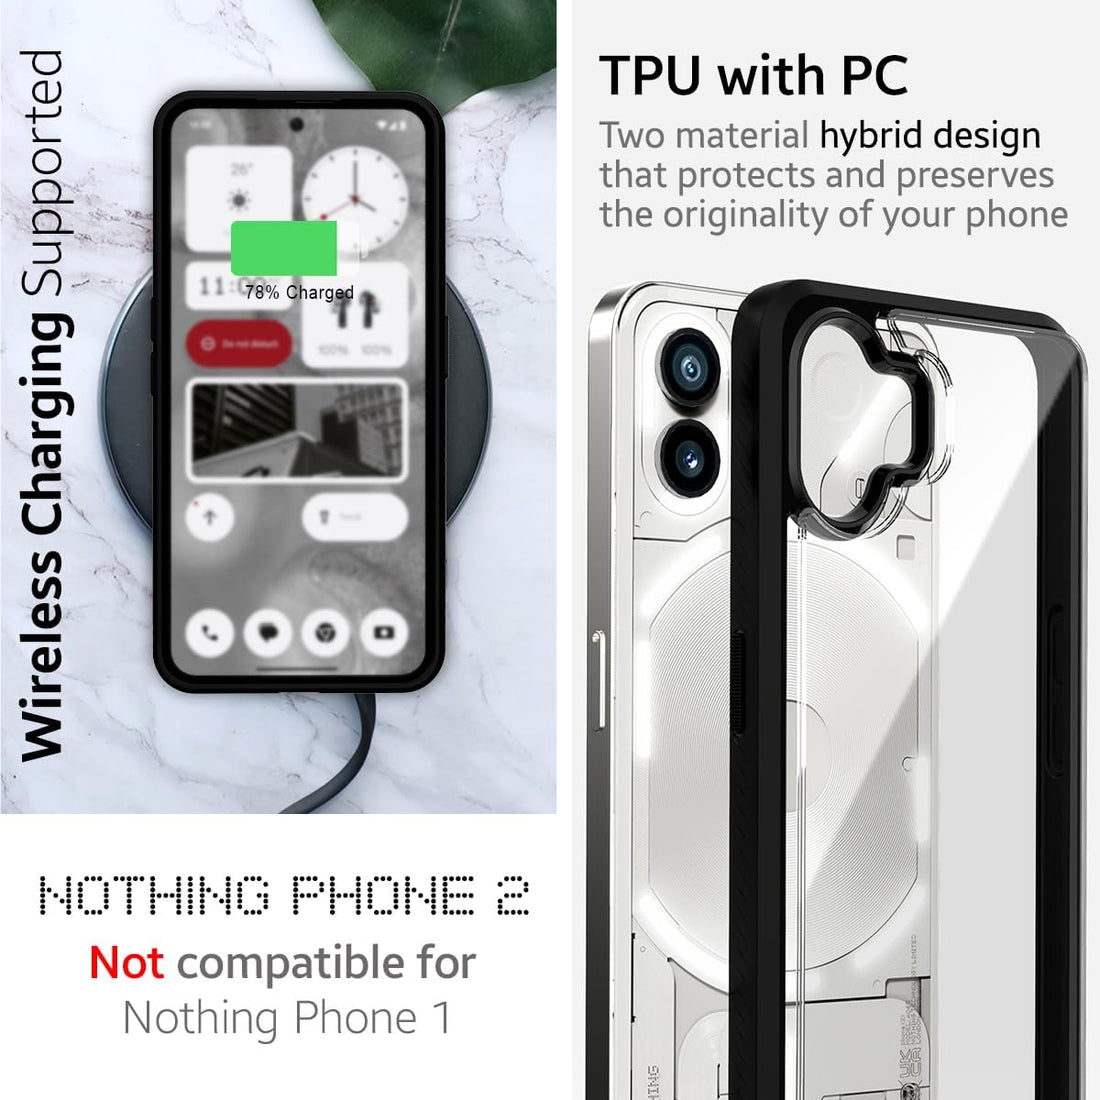 Nothing Phone 2 Impulse Back Cover Case with 1 PACK GLaS Tempered Glass Screen Protector Guard - Black